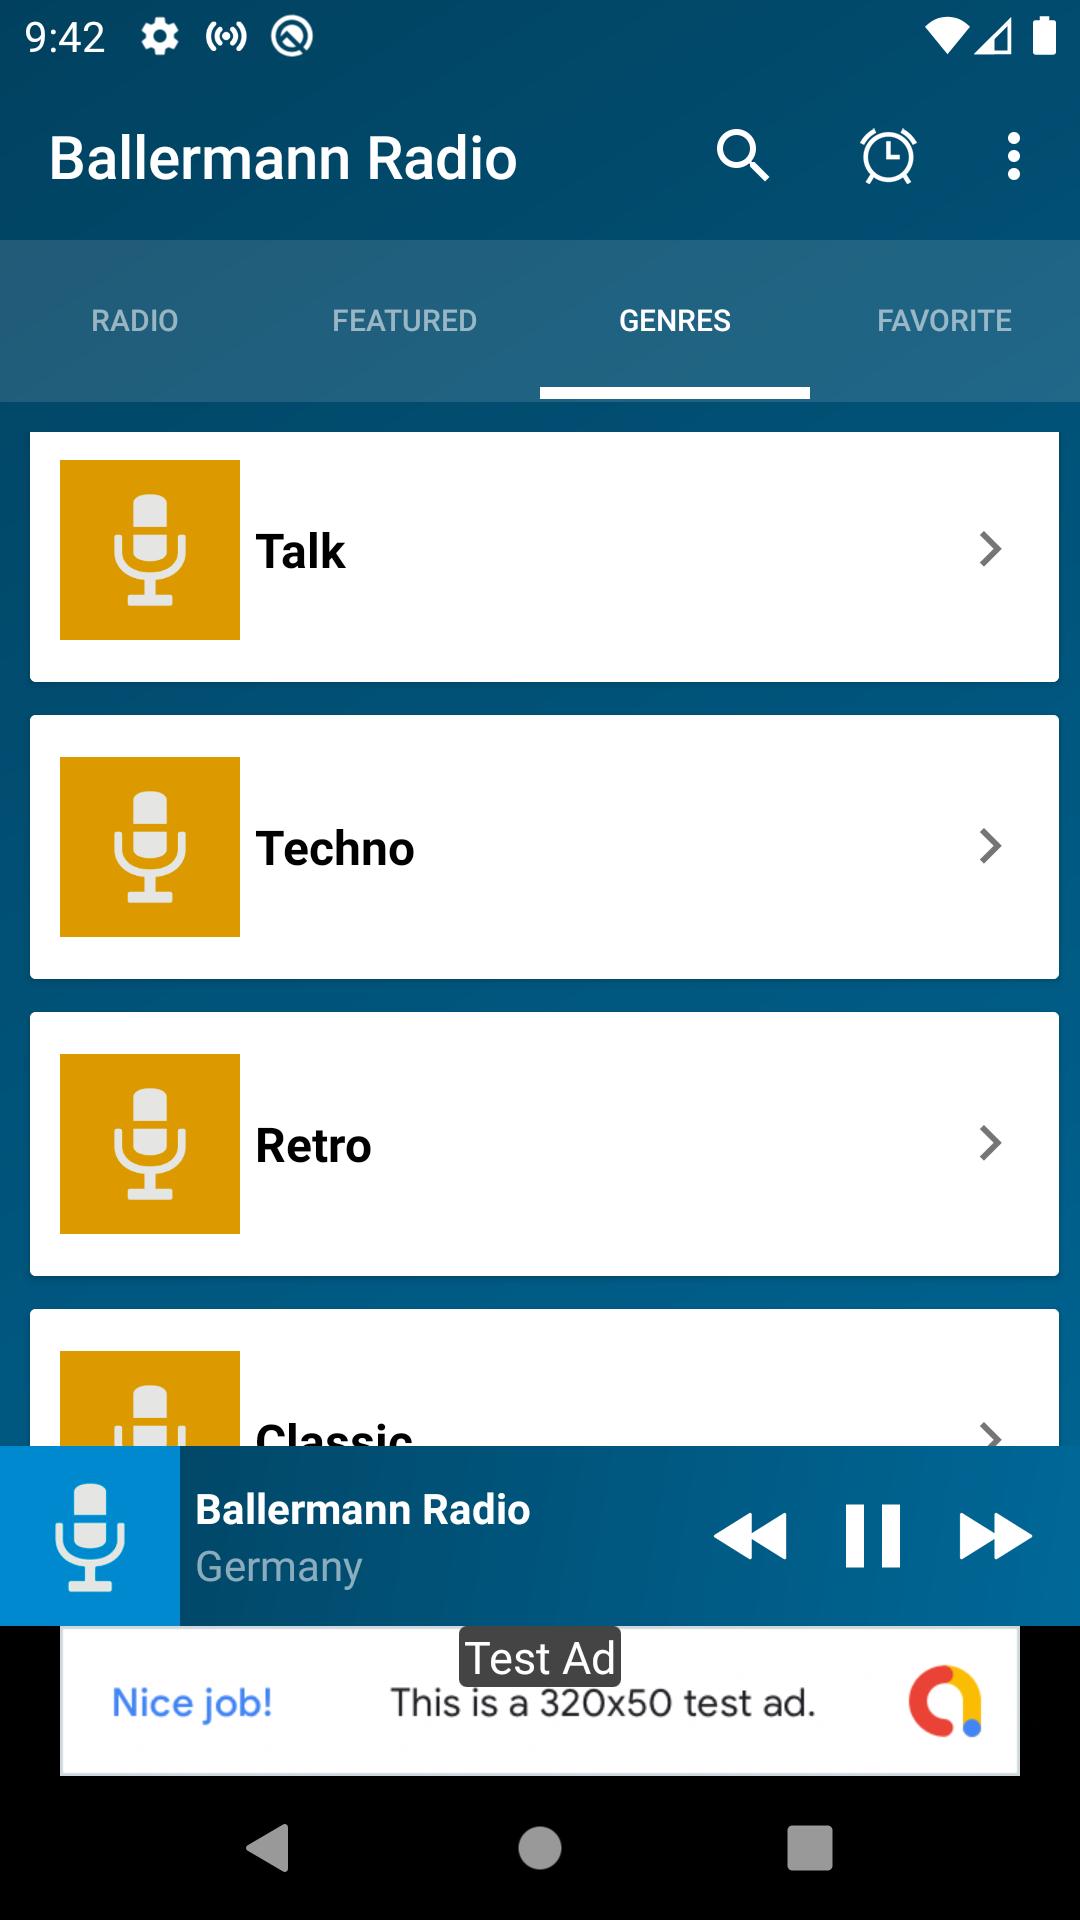 Ballermann Radio for Android - APK Download